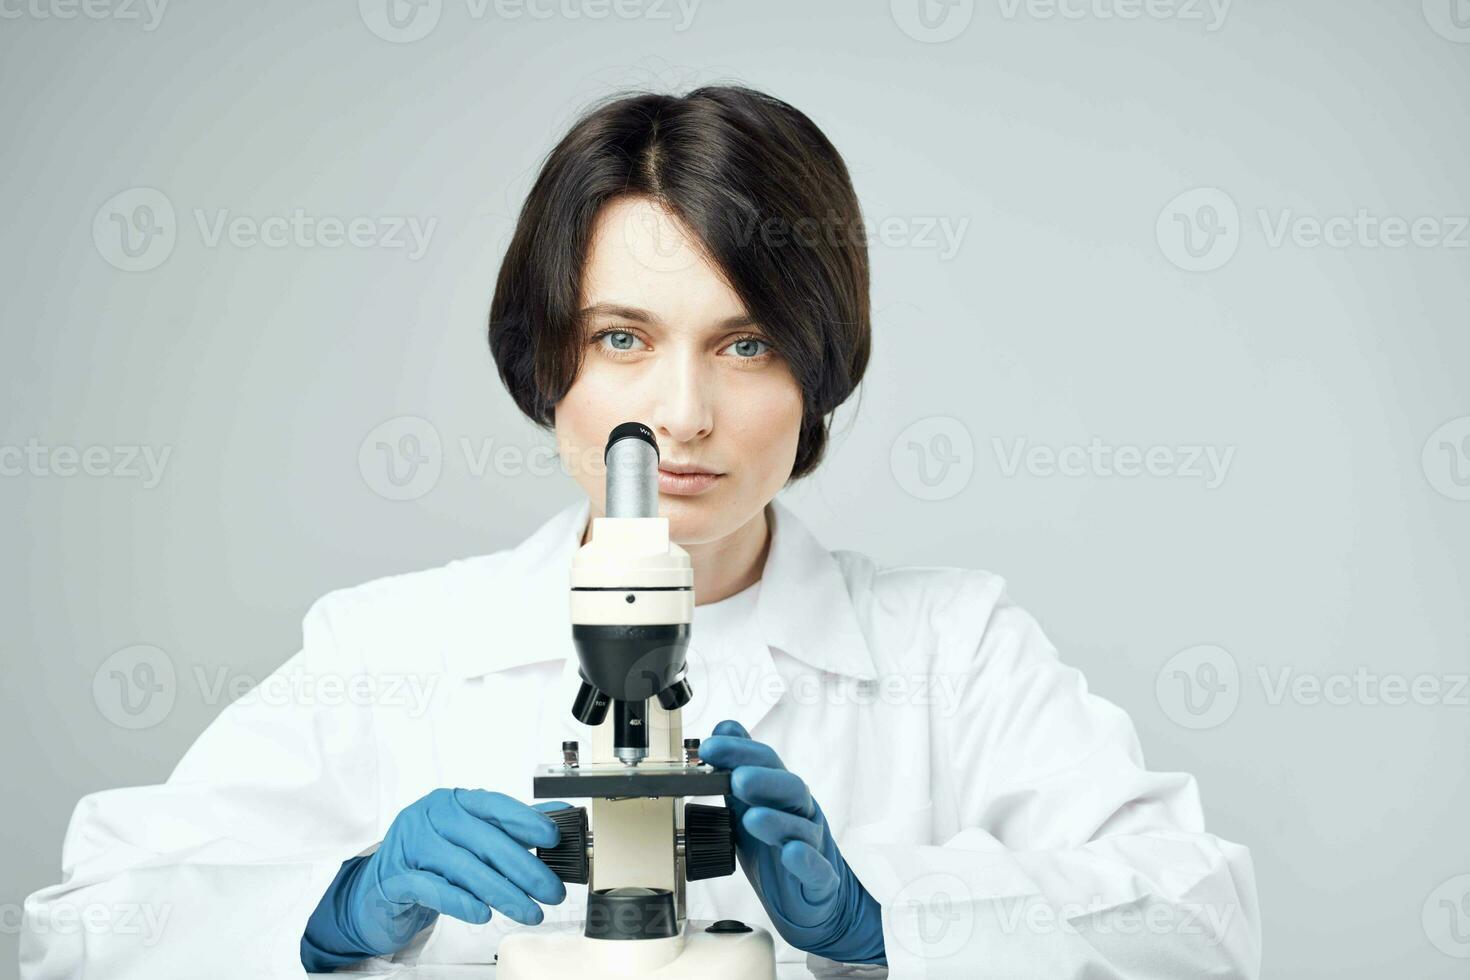 female laboratory assistant looking through a microscope diagnostics research science photo